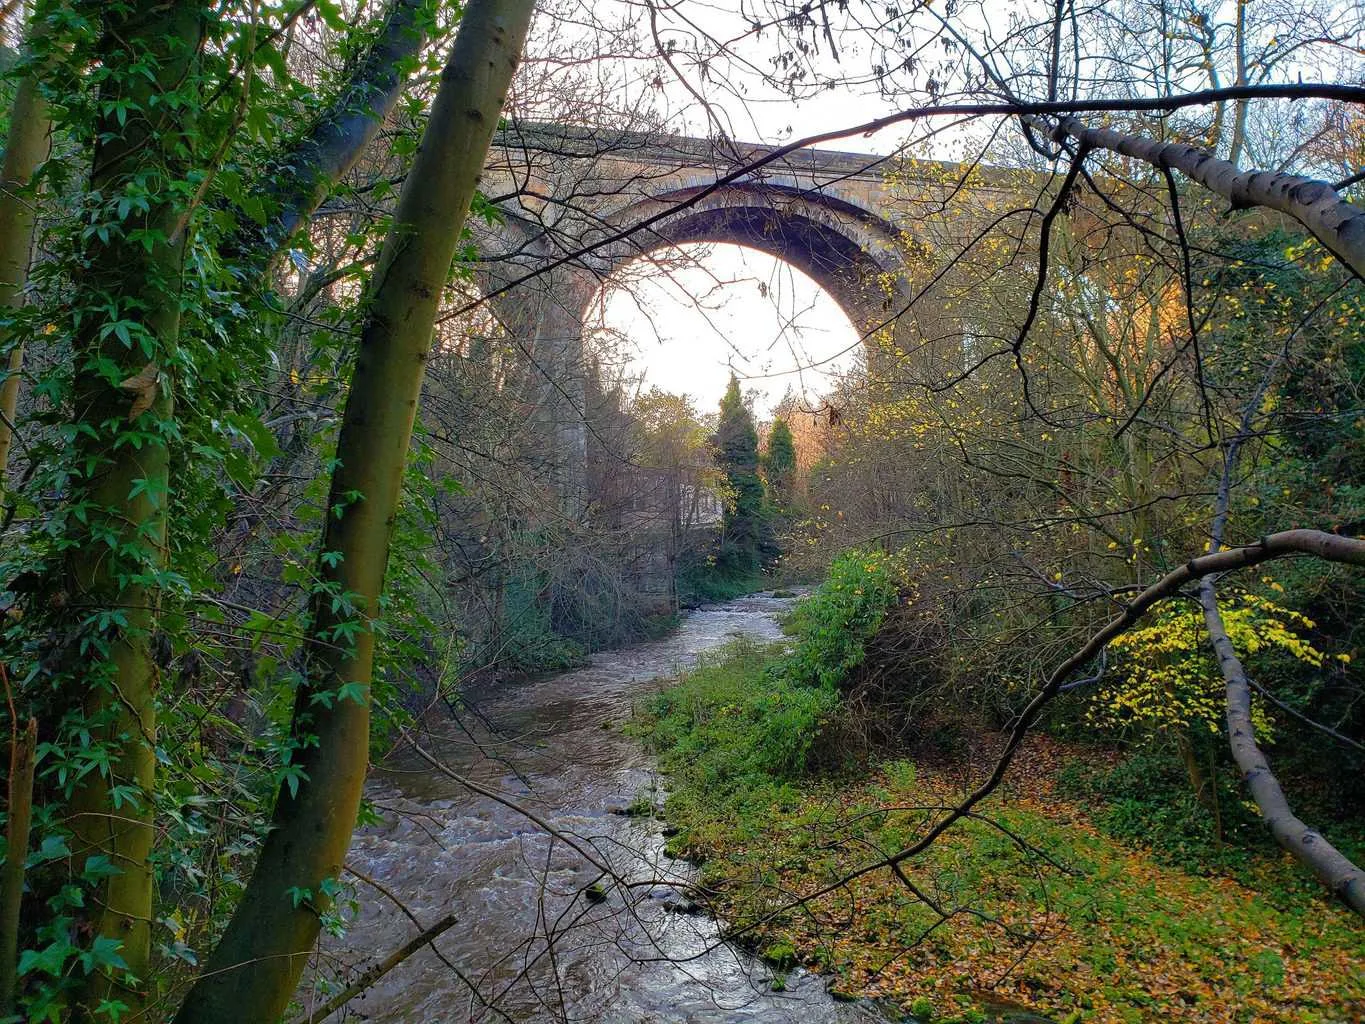 The scenic natural and beautiful bridges you'll find along the Water of Leith Walkway.